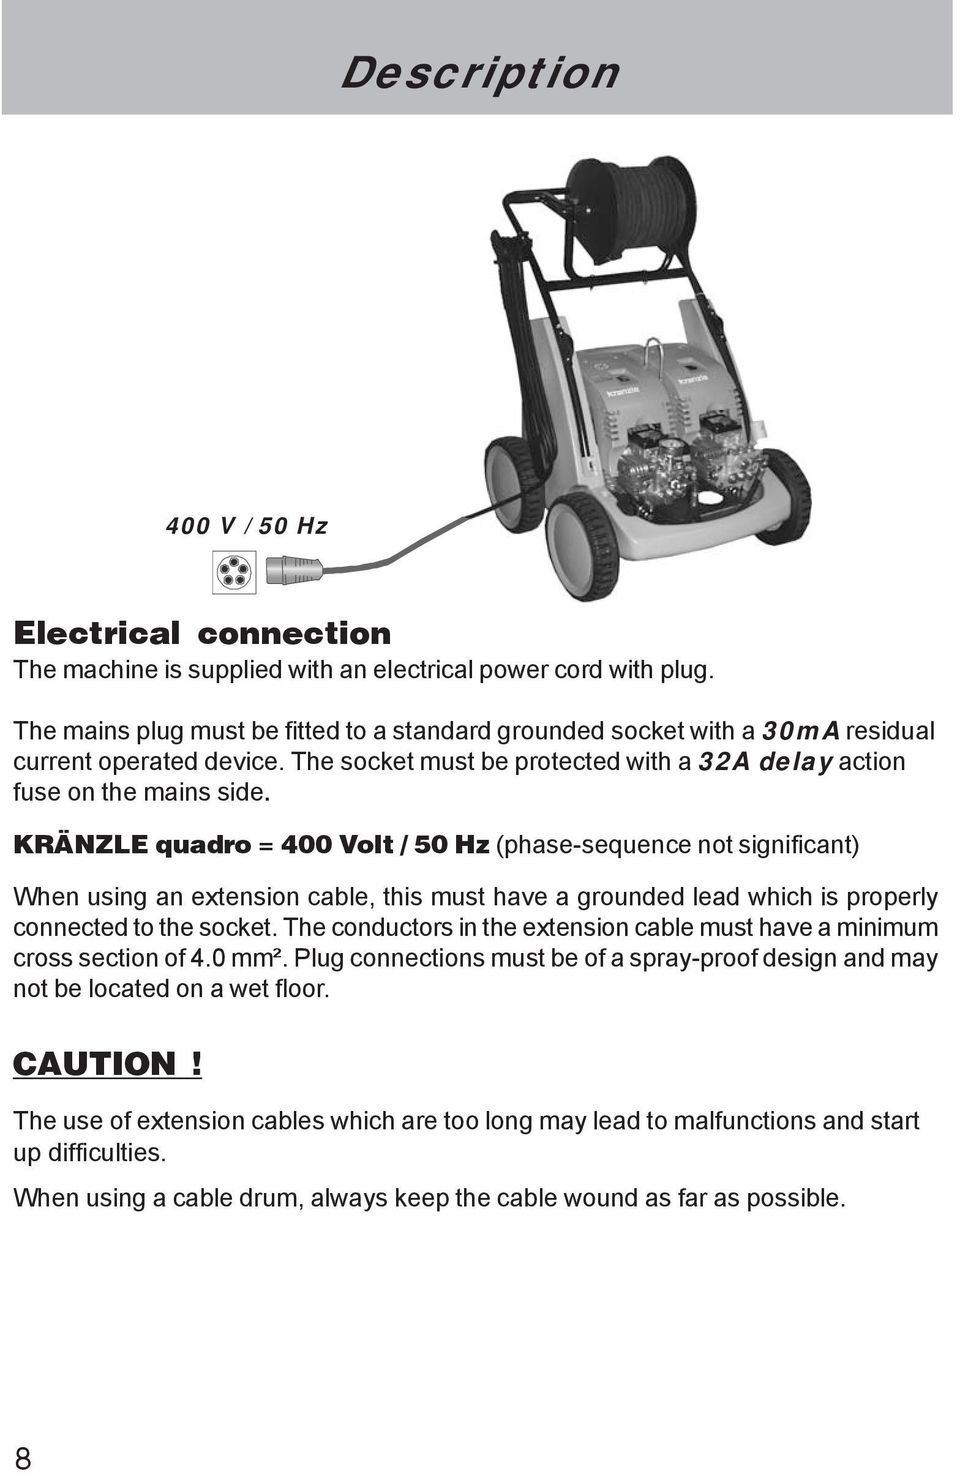 KRÄNZLE quadro = 400 Volt / 50 Hz (phase-sequence not significant) When using an extension cable, this must have a grounded lead which is properly connected to the socket.